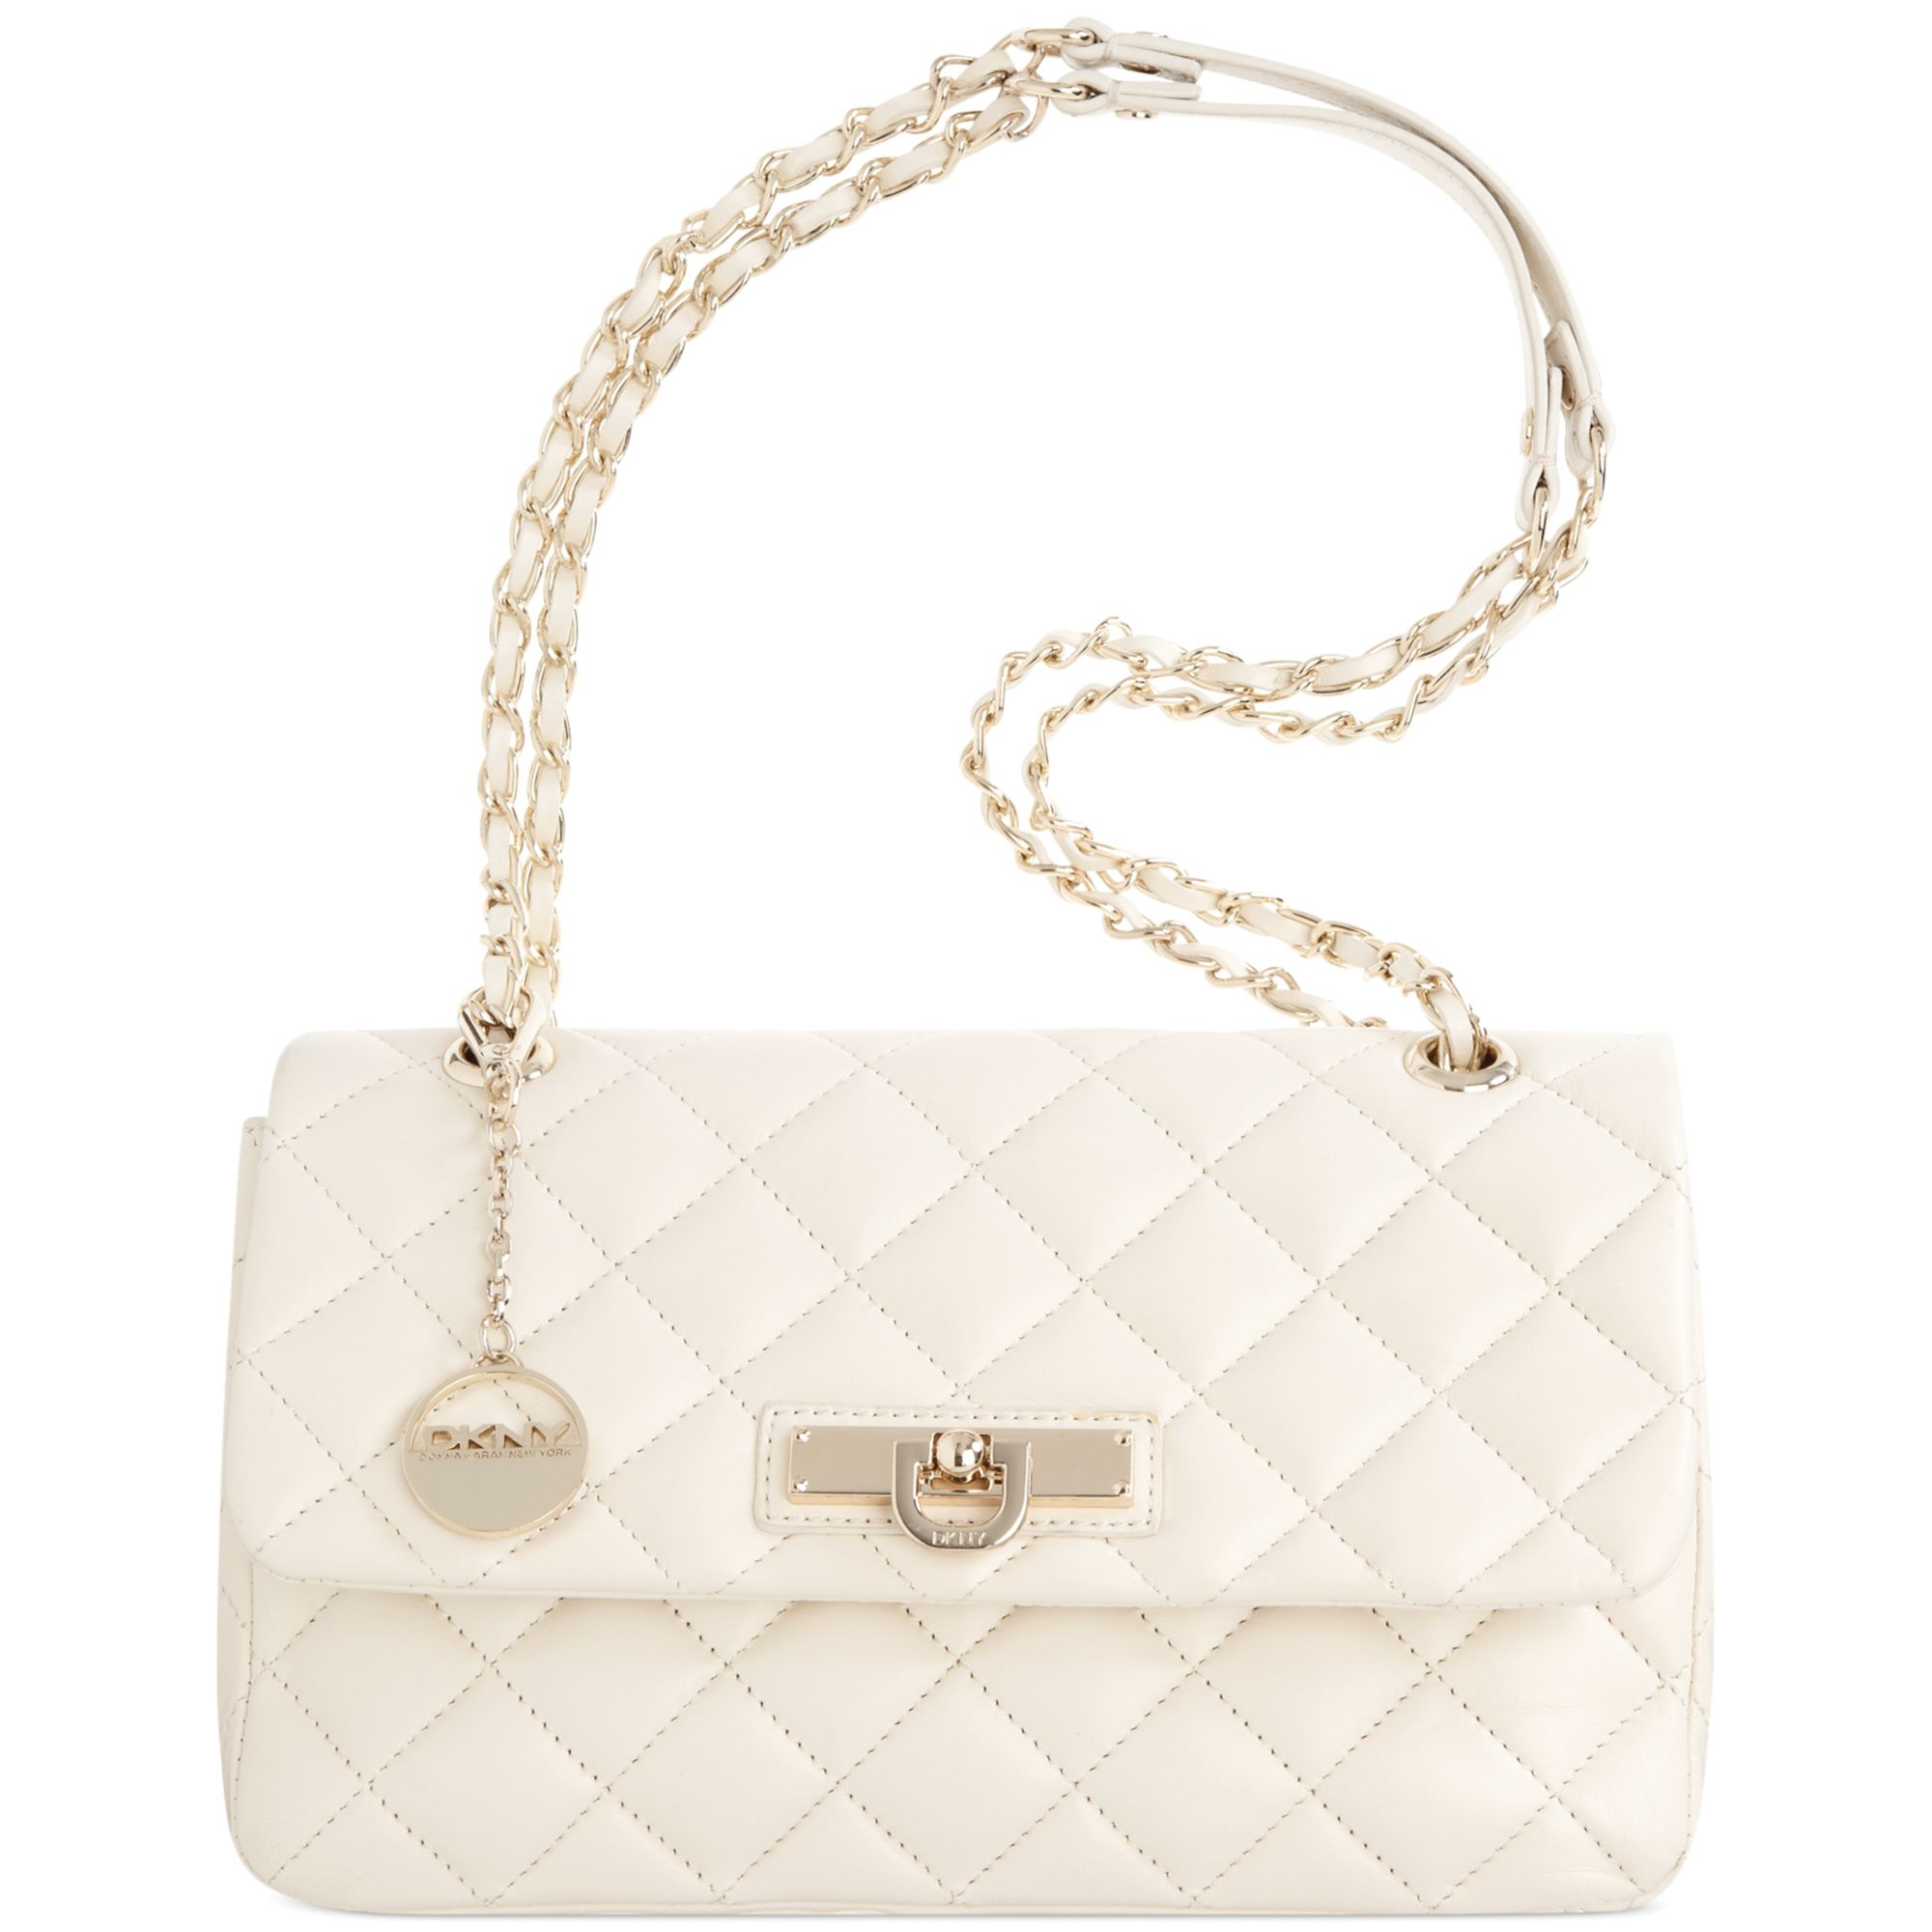 Dkny Bryant Shoulder Mini Bag Chnlg / Agwine - Buy At Outlet Prices!